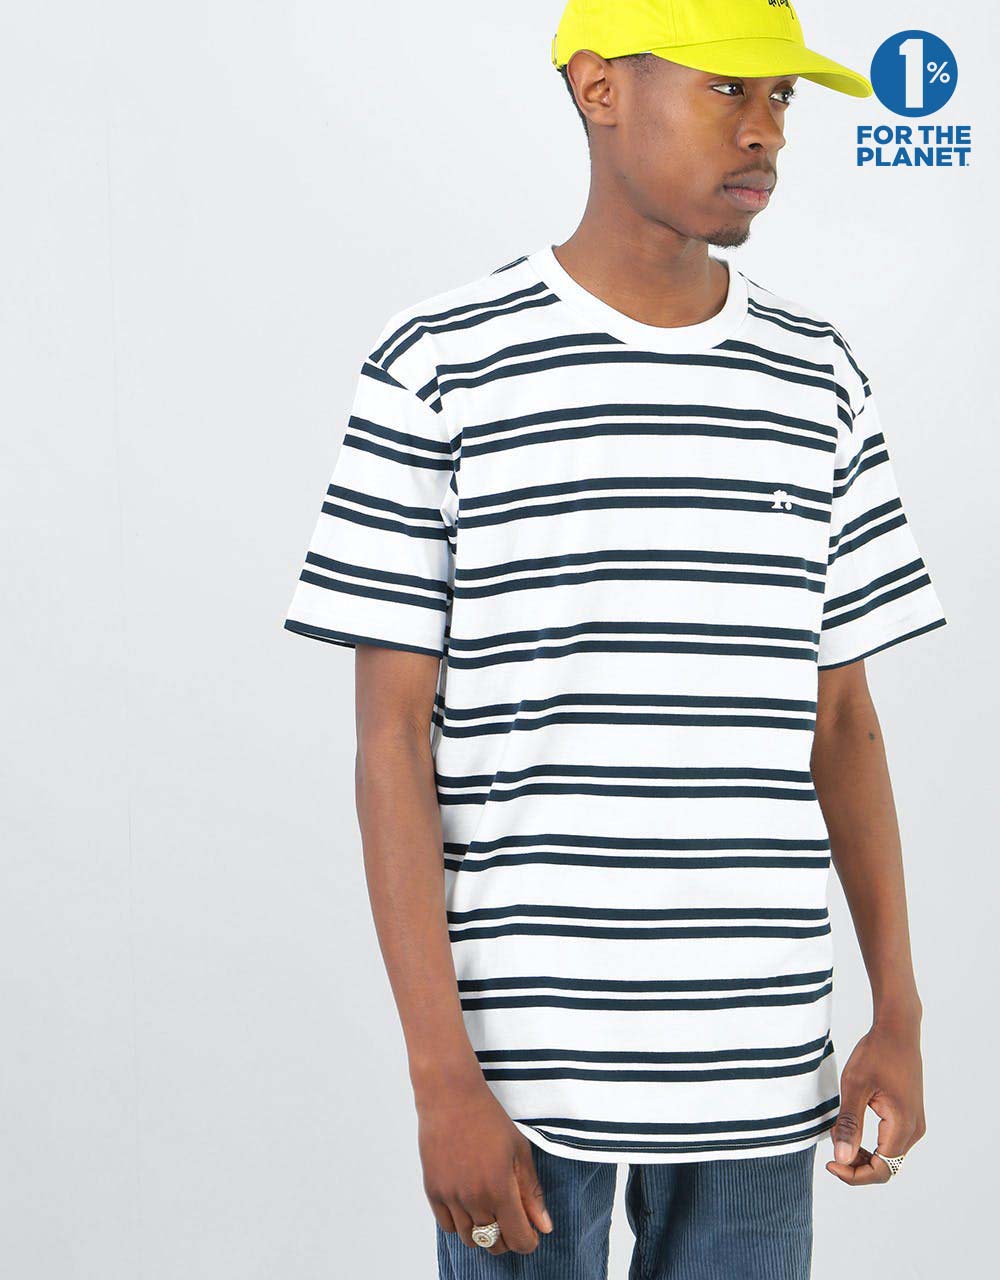 Route One Classic Stripe T-Shirt - White/ Navy